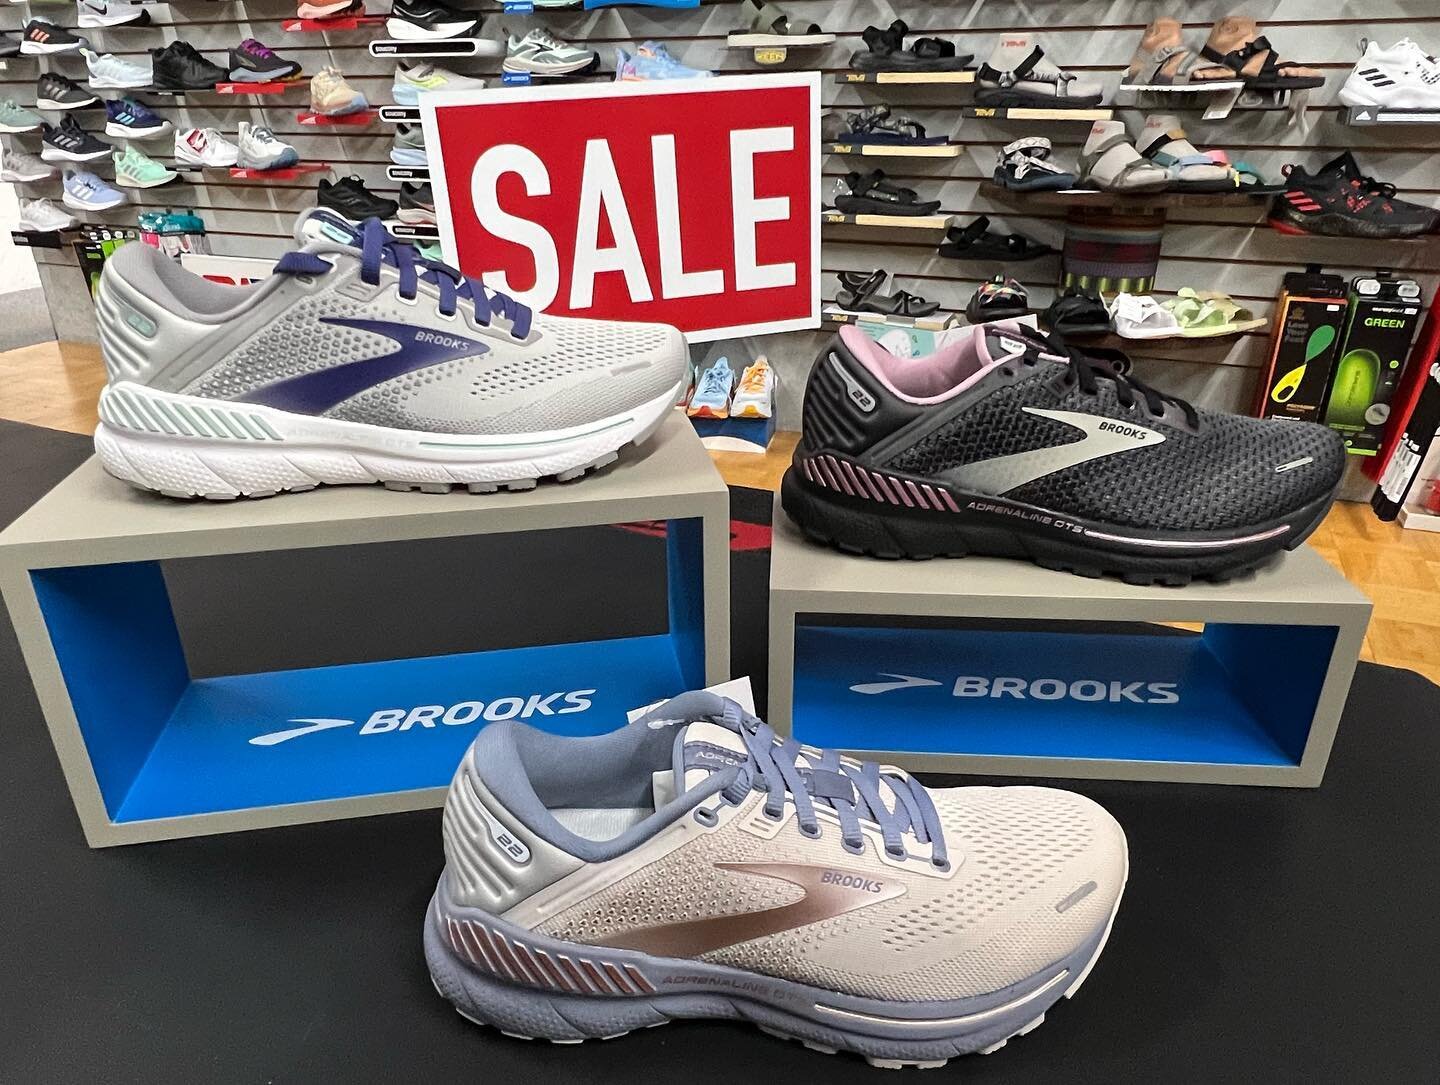 Brooks Adrenaline GTS 22 Running Shoes are on Sale! Mens and Women&rsquo;s Adrenalines are marked down! Wide Widths are in Stock!